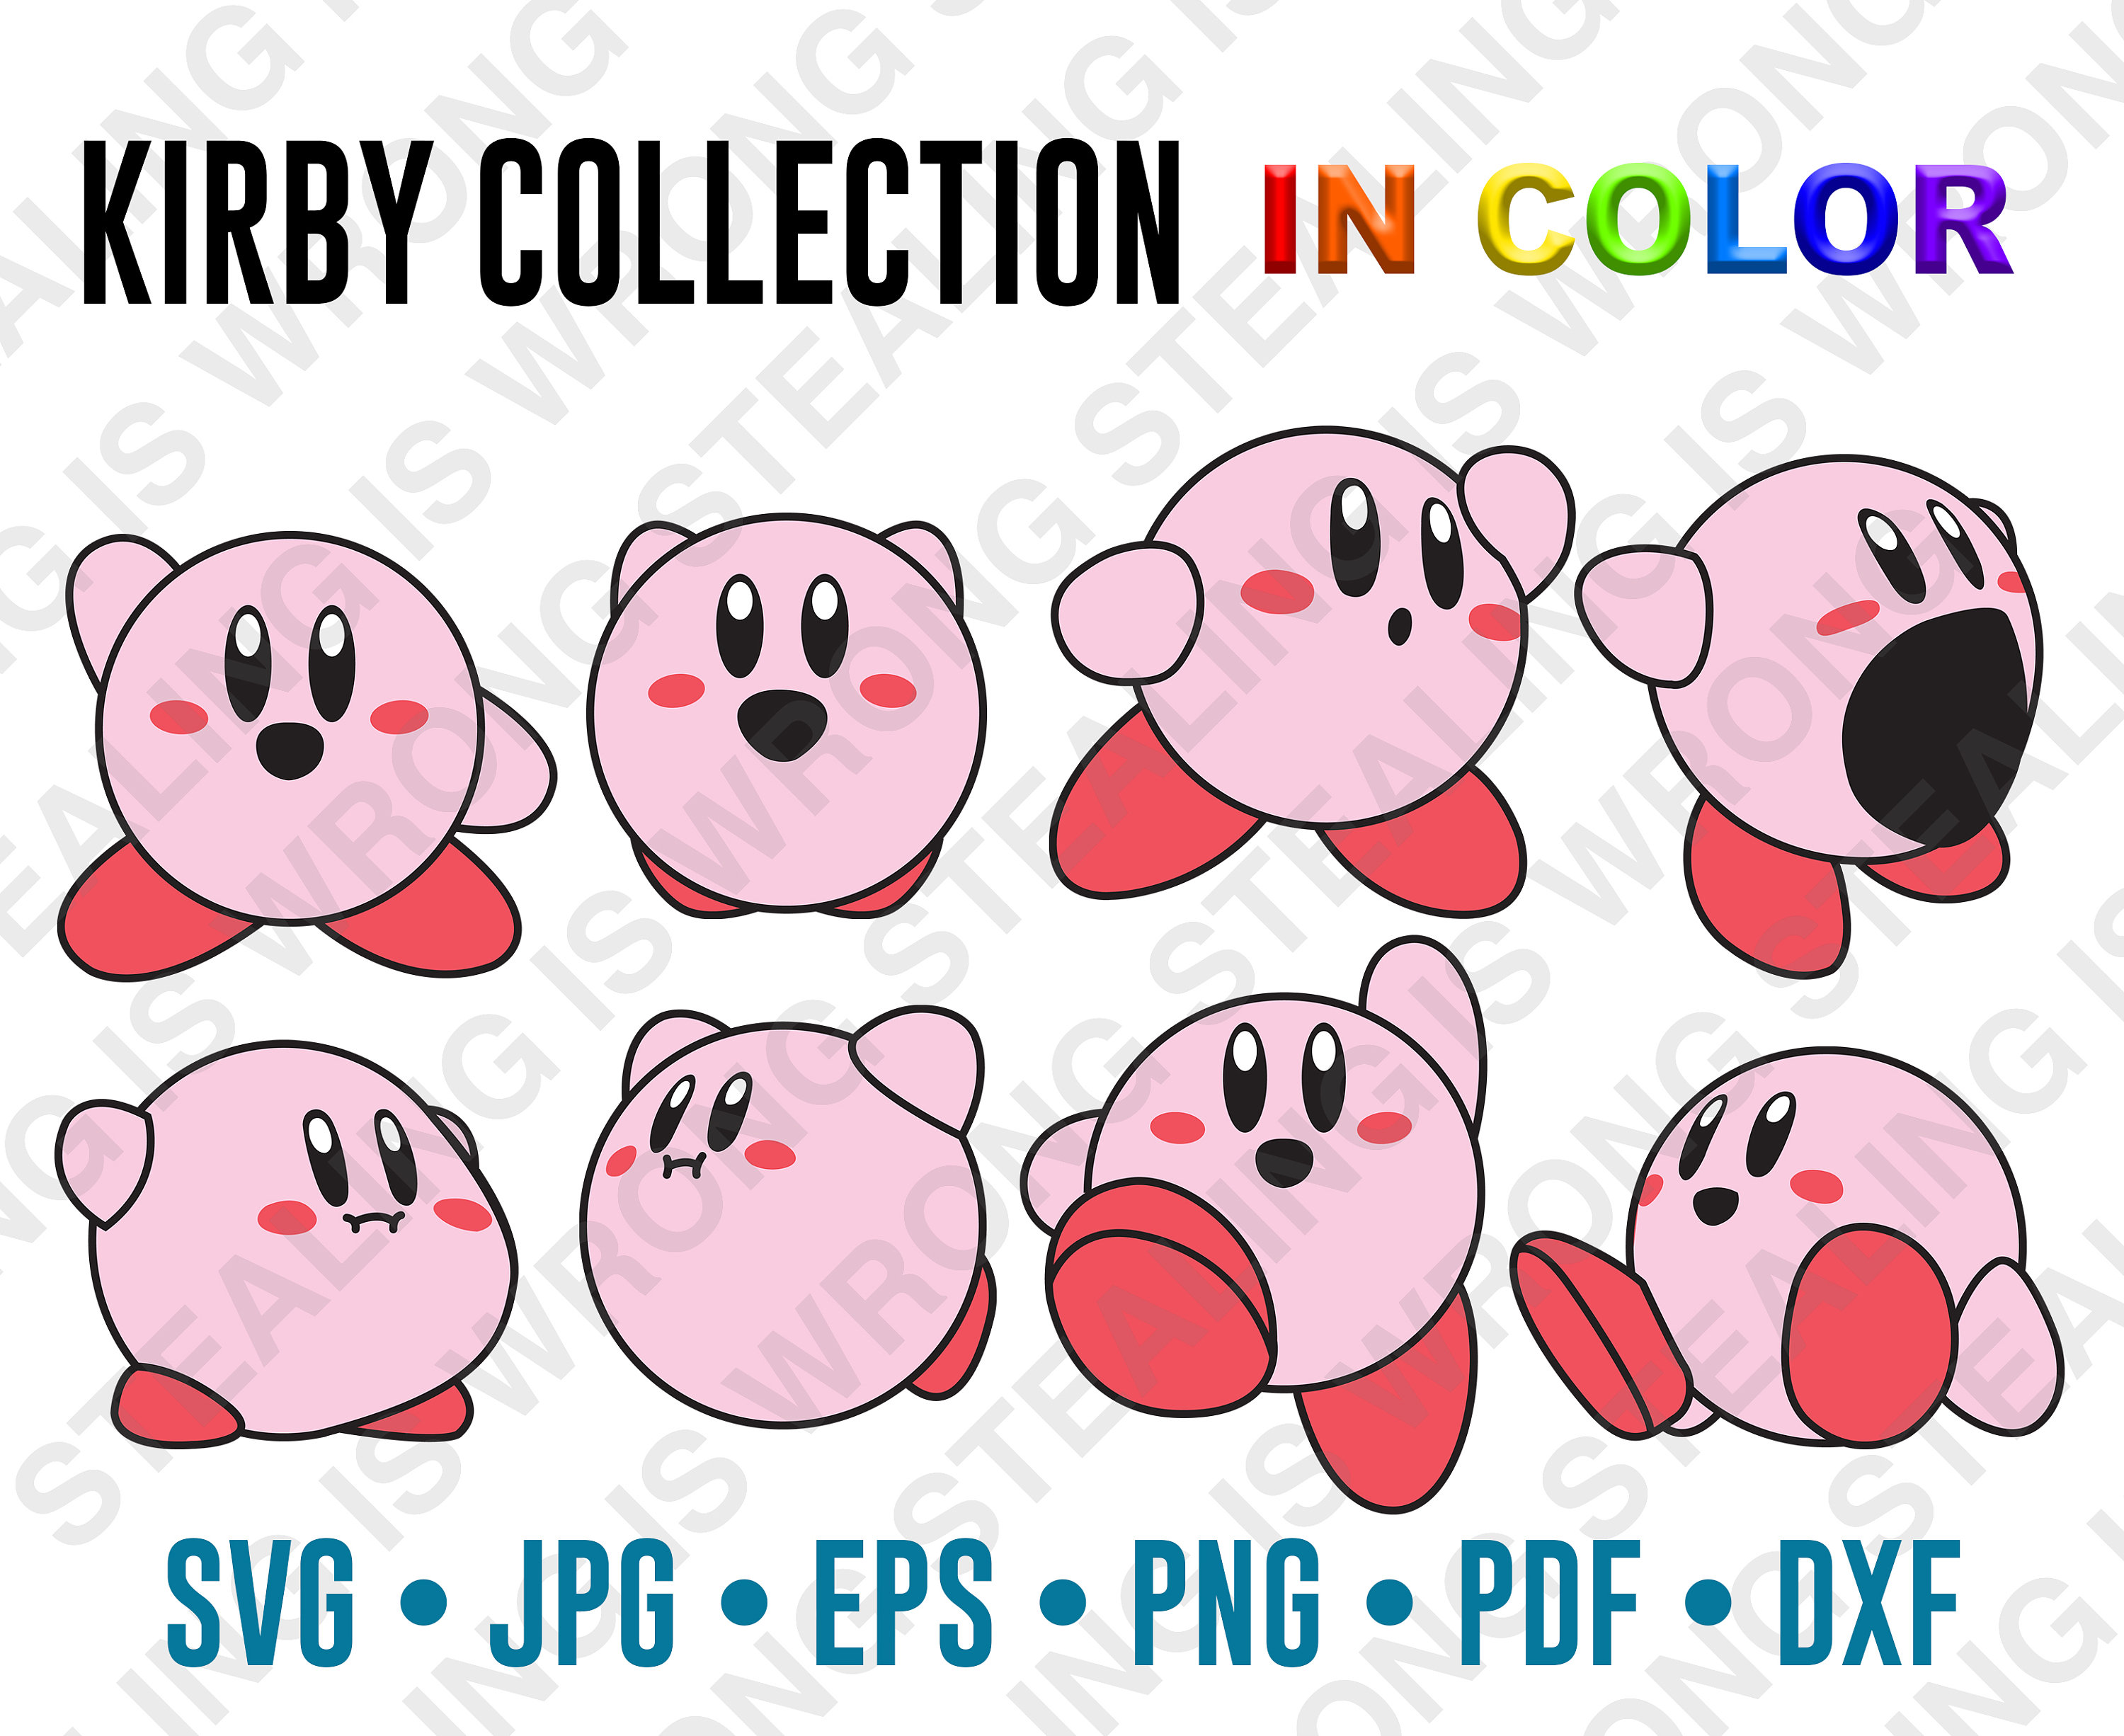 Kirby Collection color Digital Files Only Svg Jpg Png - Etsy